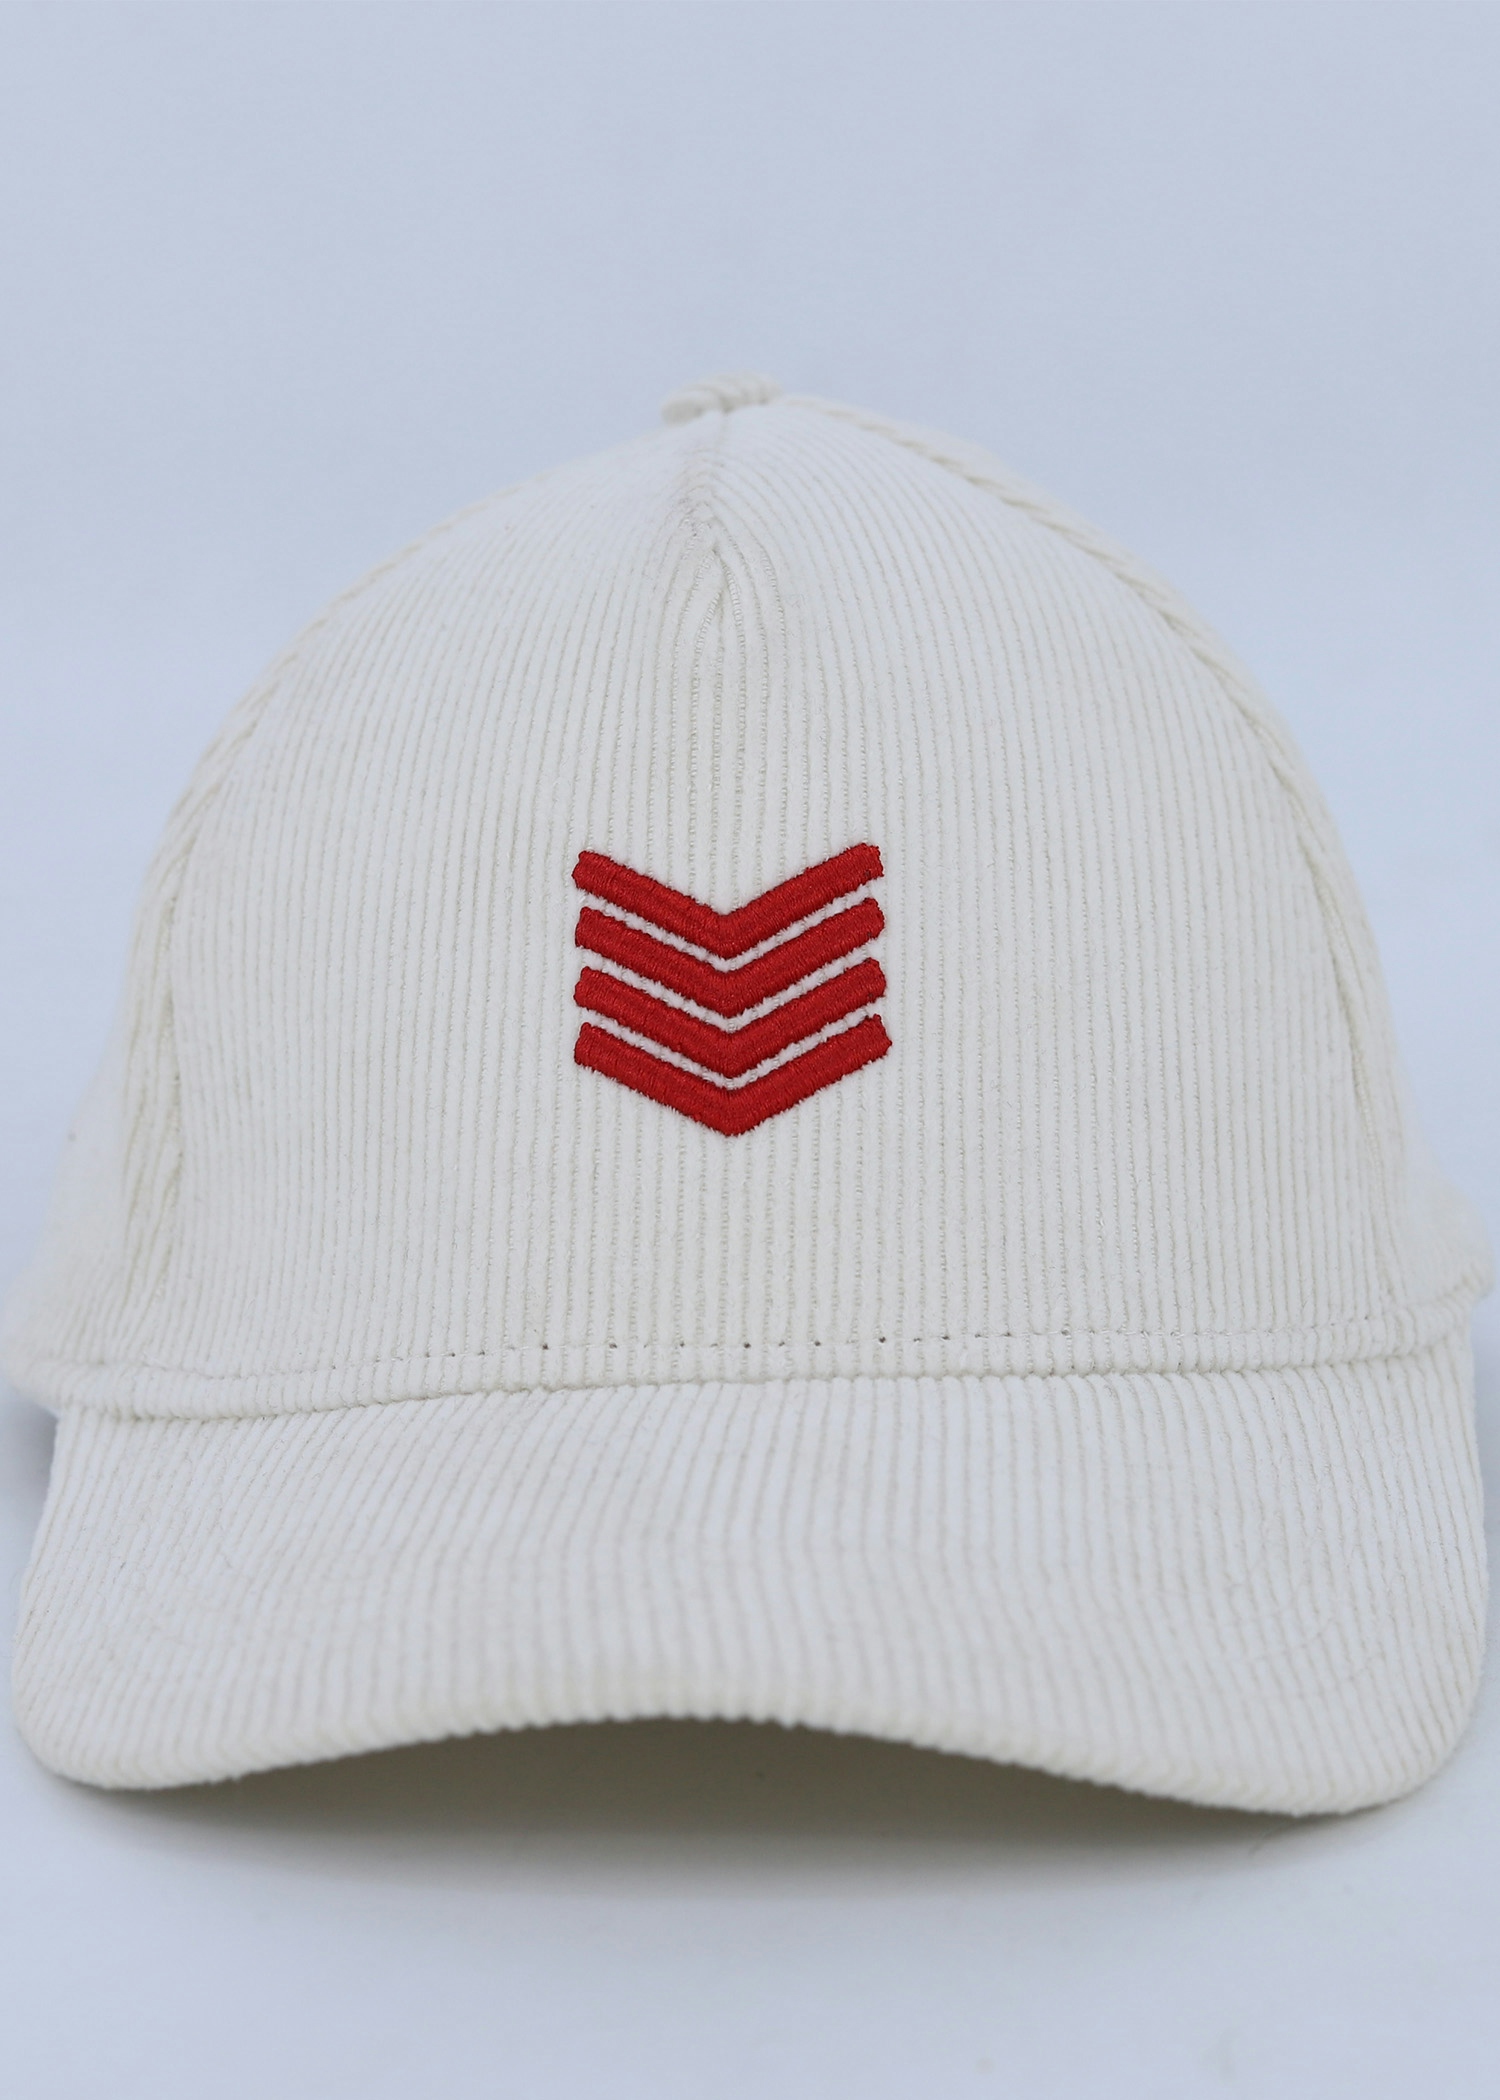 rooster cord cap white color front view